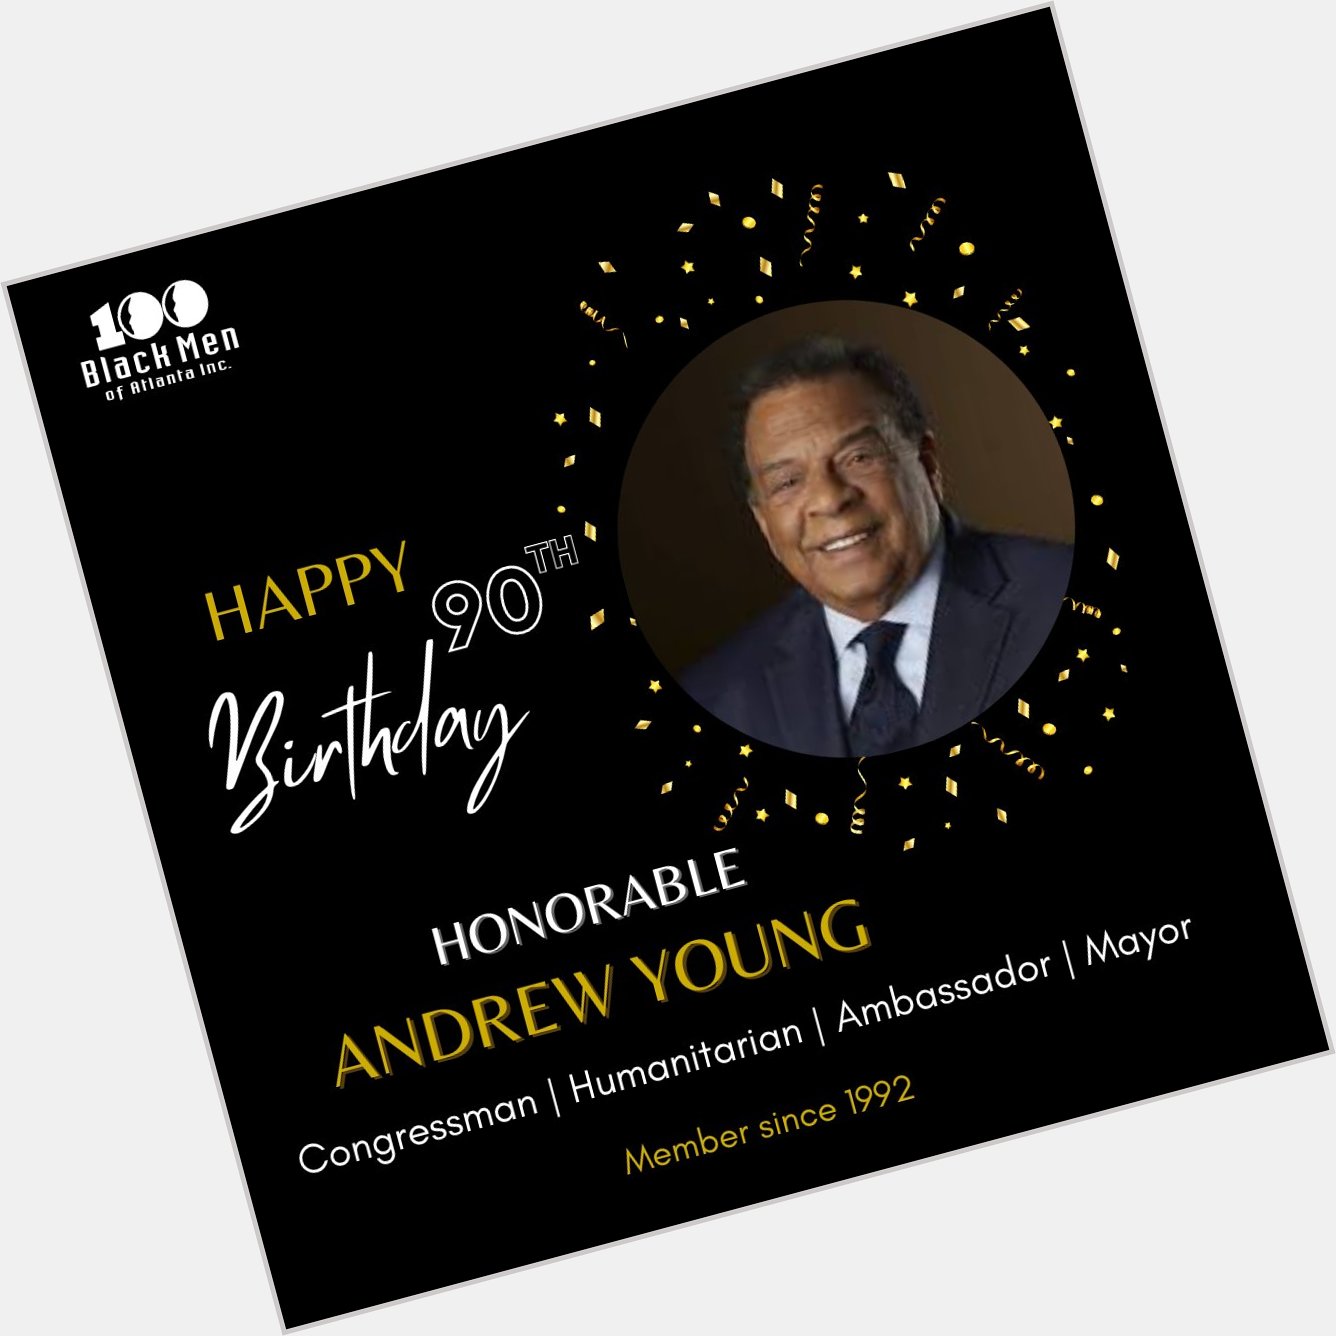 Happy 90th Birthday Honorable Andrew Young! 